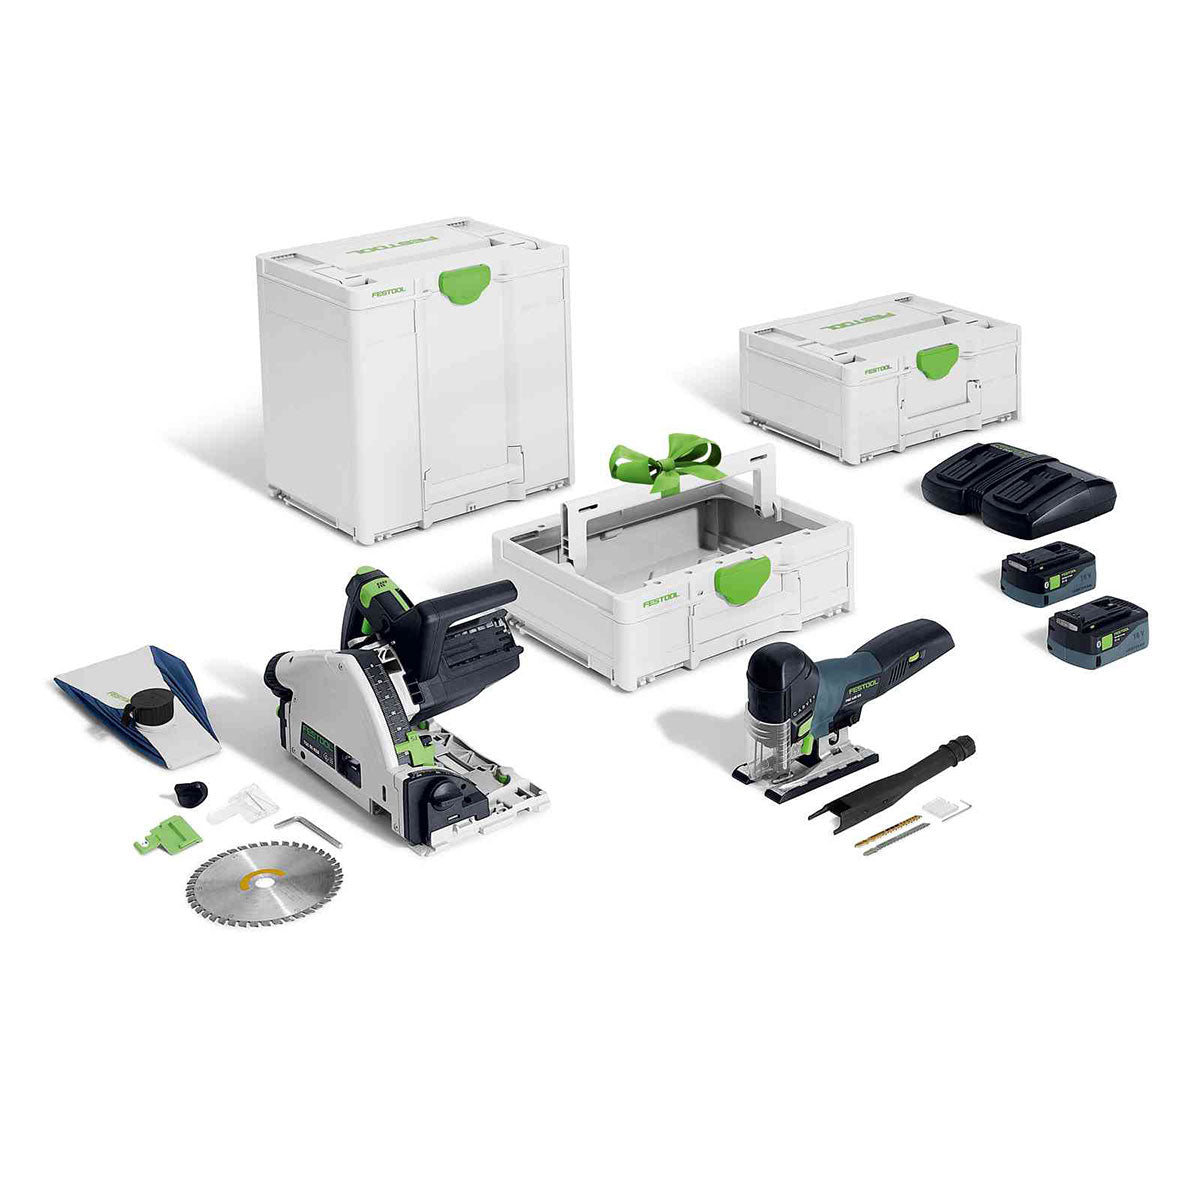 Festool 18V Brushless Plunge Saw & Jigsaw with 2 x 5.0Ah Battery, Rapid Charger 578027